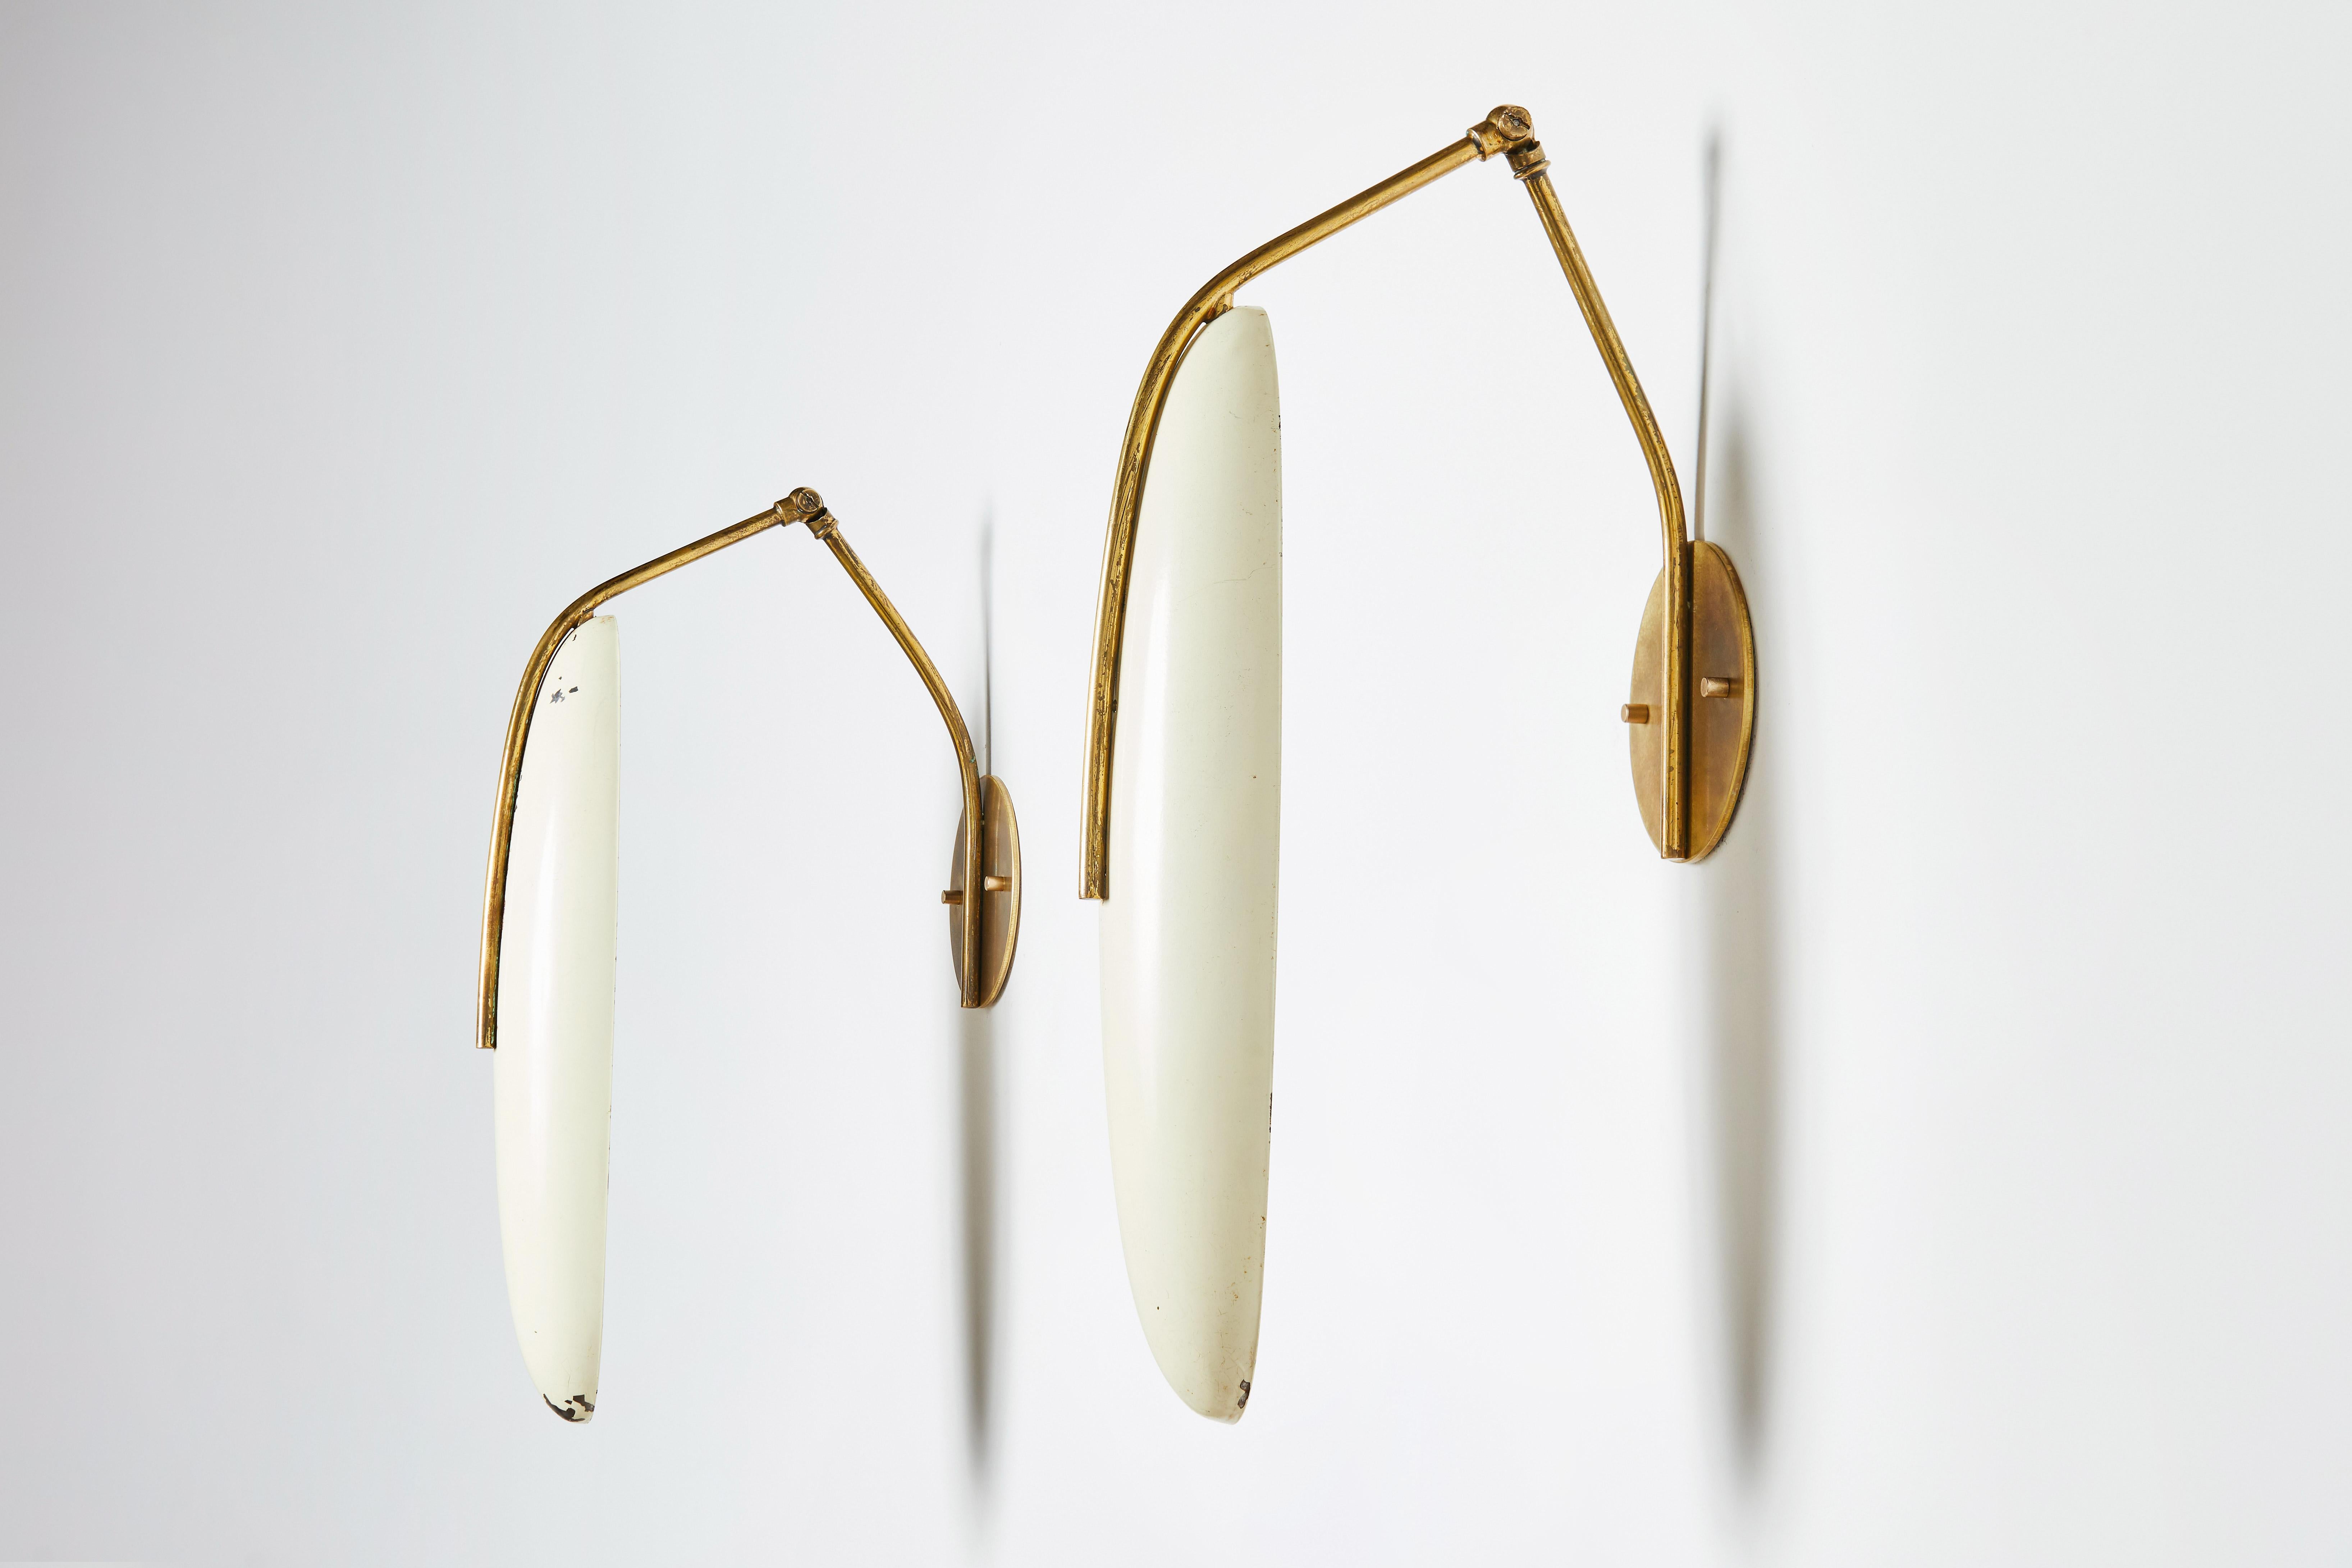 Enameled Pair of Sconces by Gilardi & Barzaghi